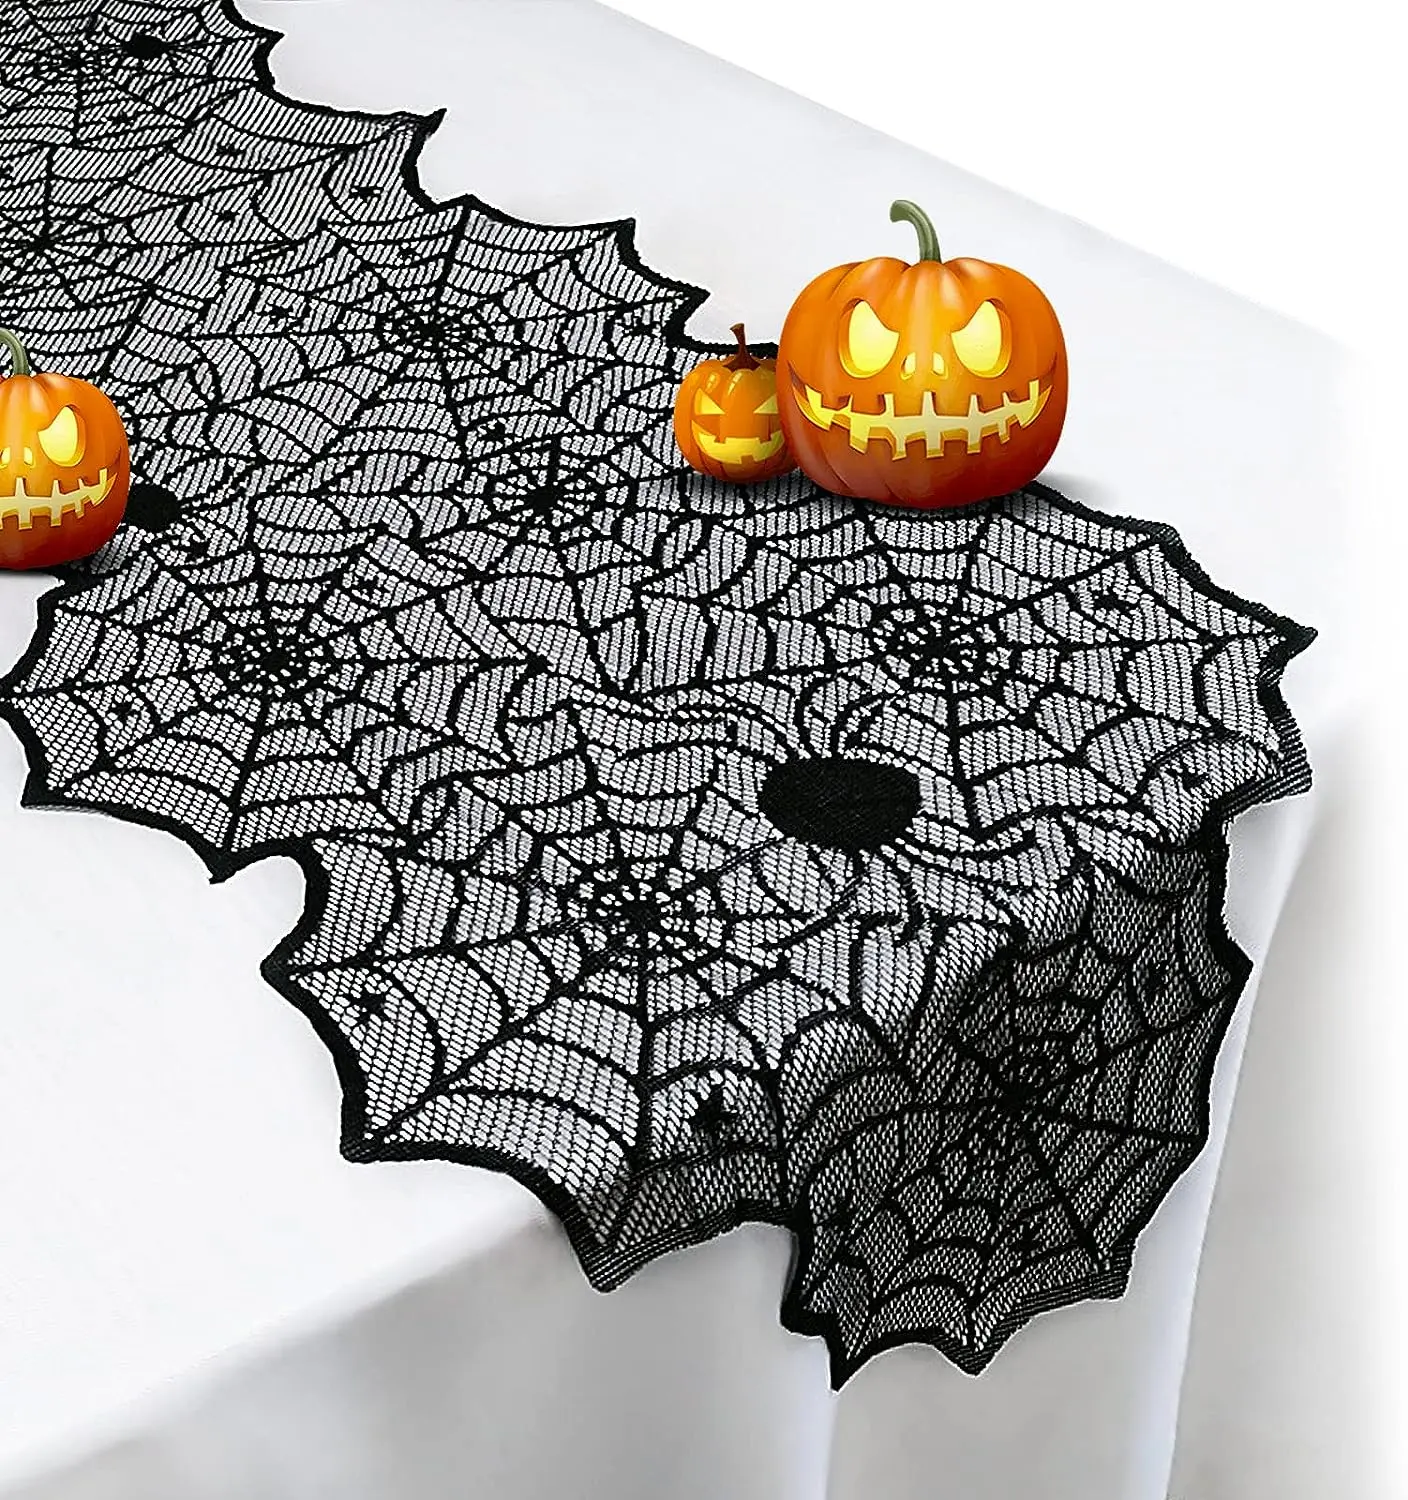 

Halloween Spider Web Table Runners Black Lace Tablecloth Halloween Table Decoration Event Party Supplies 18" x 72" table cover